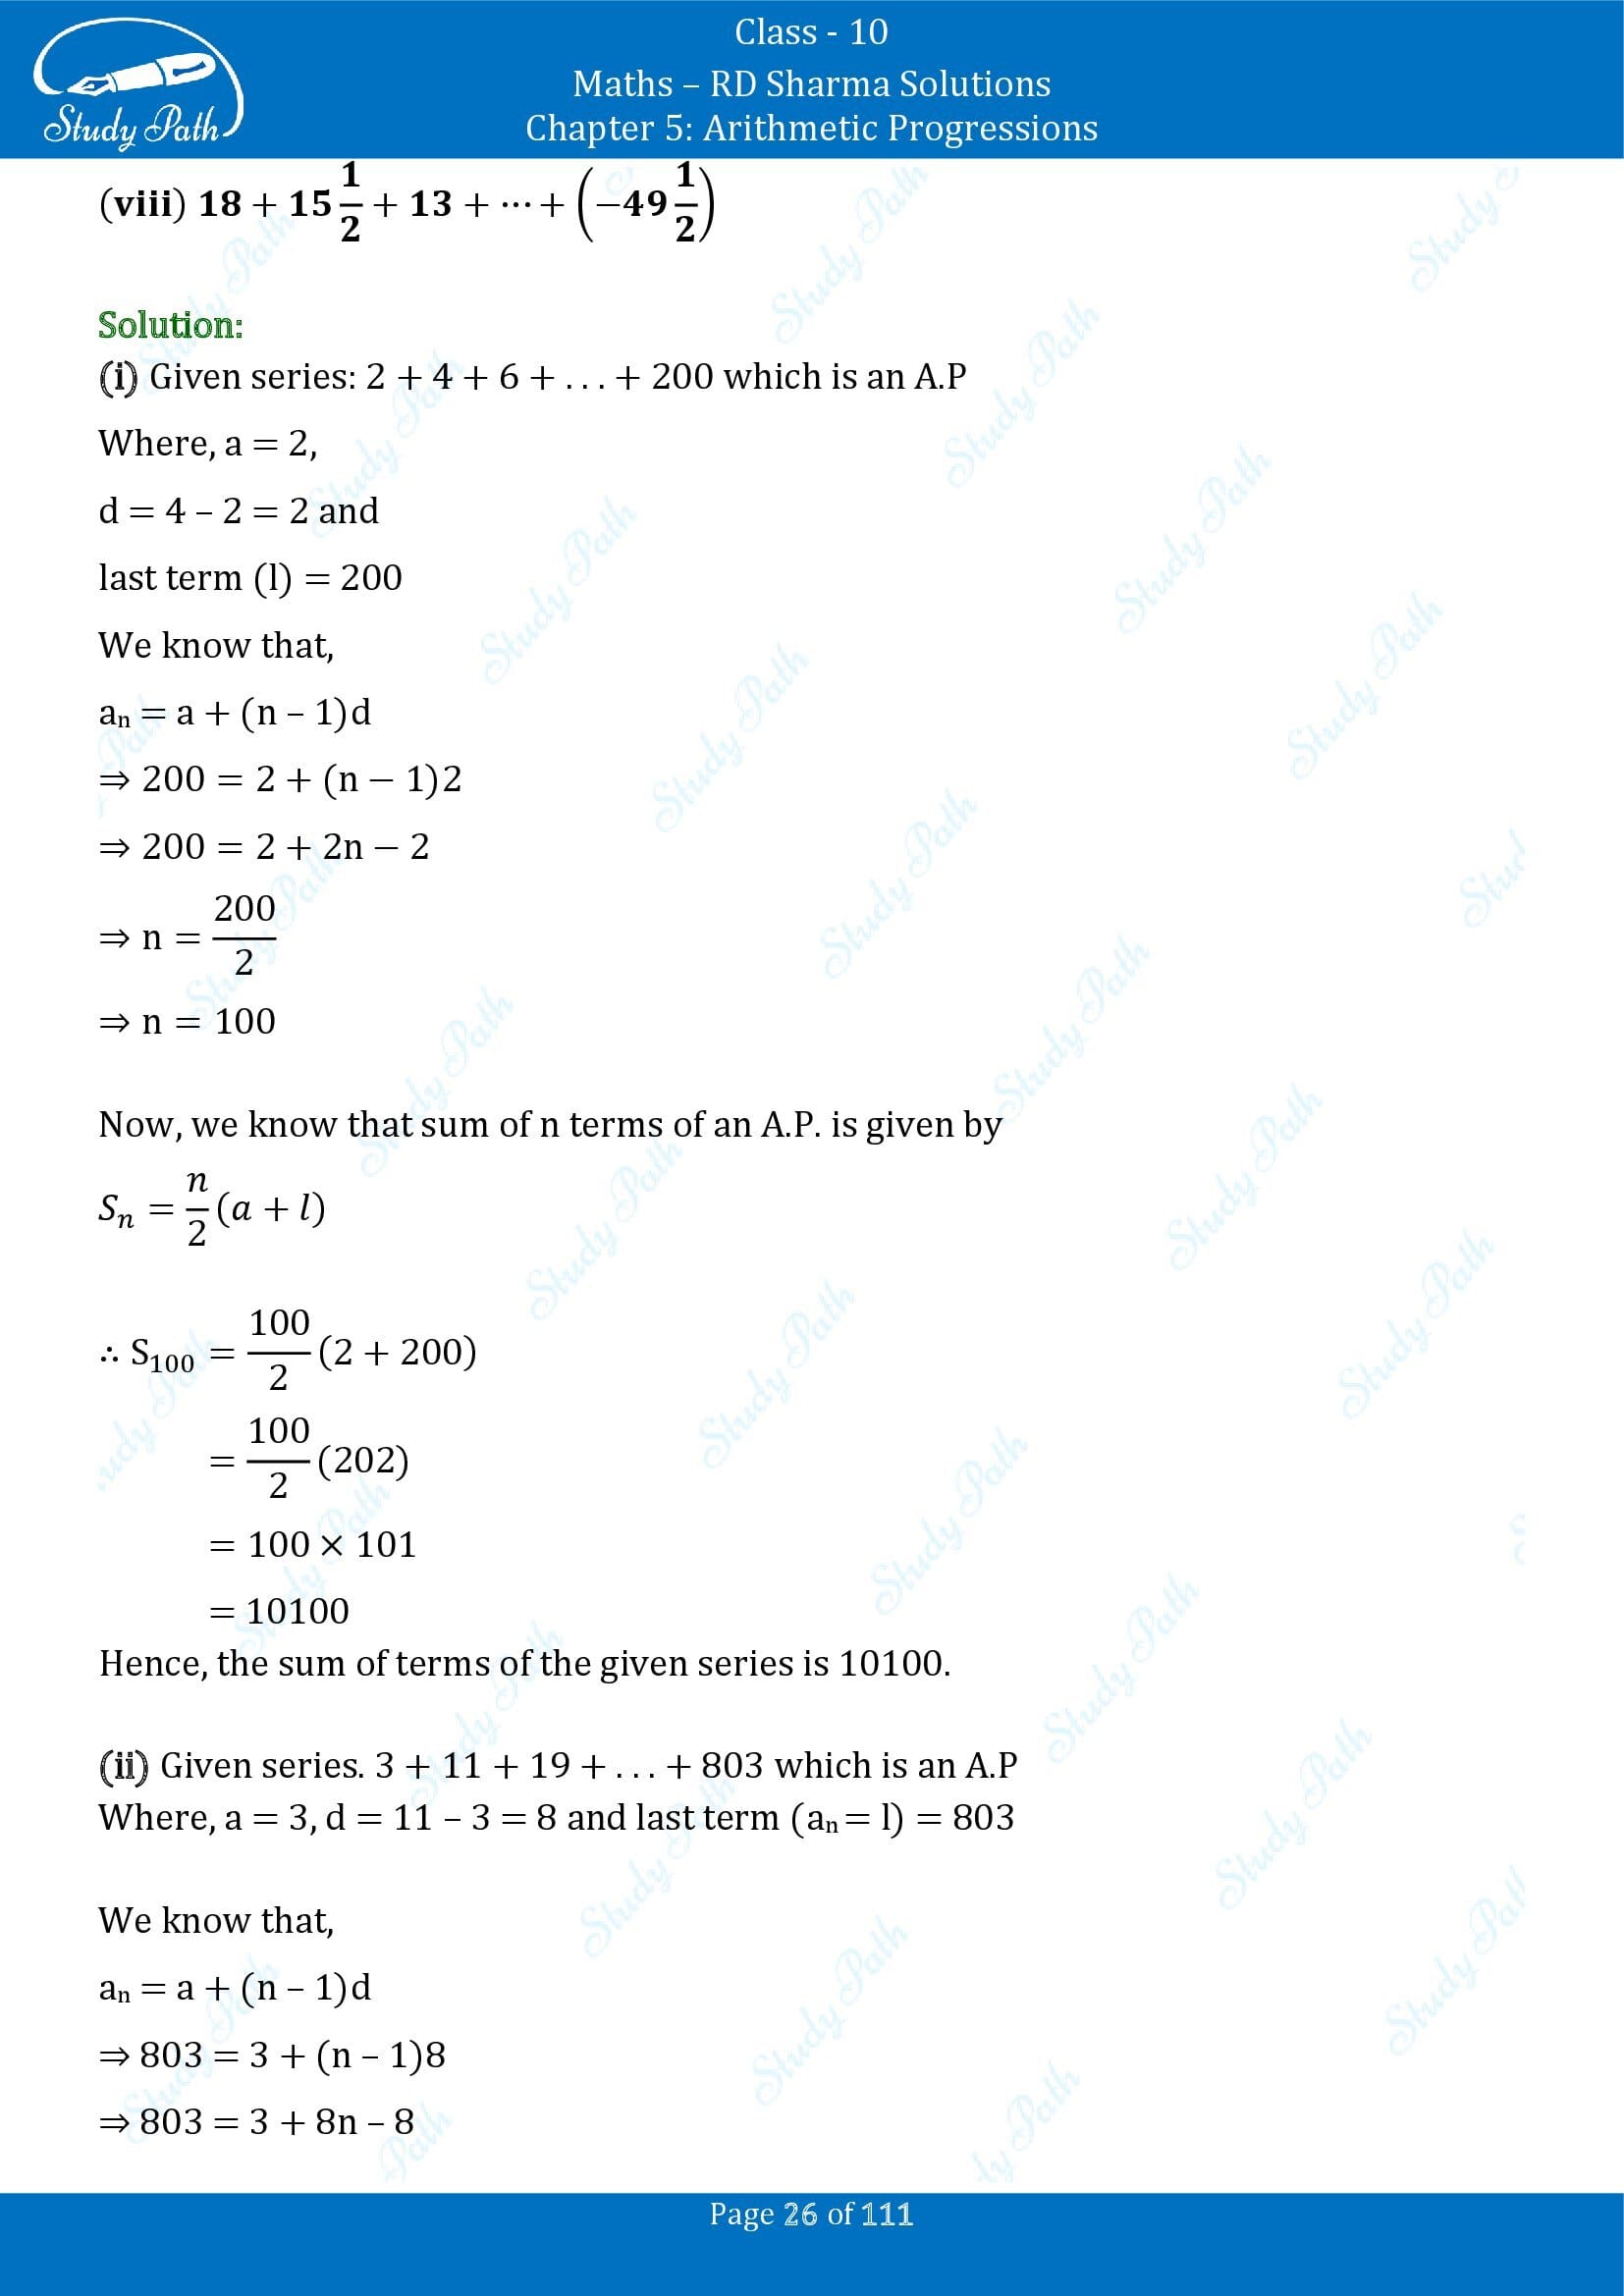 RD Sharma Solutions Class 10 Chapter 5 Arithmetic Progressions Exercise 5.6 00026